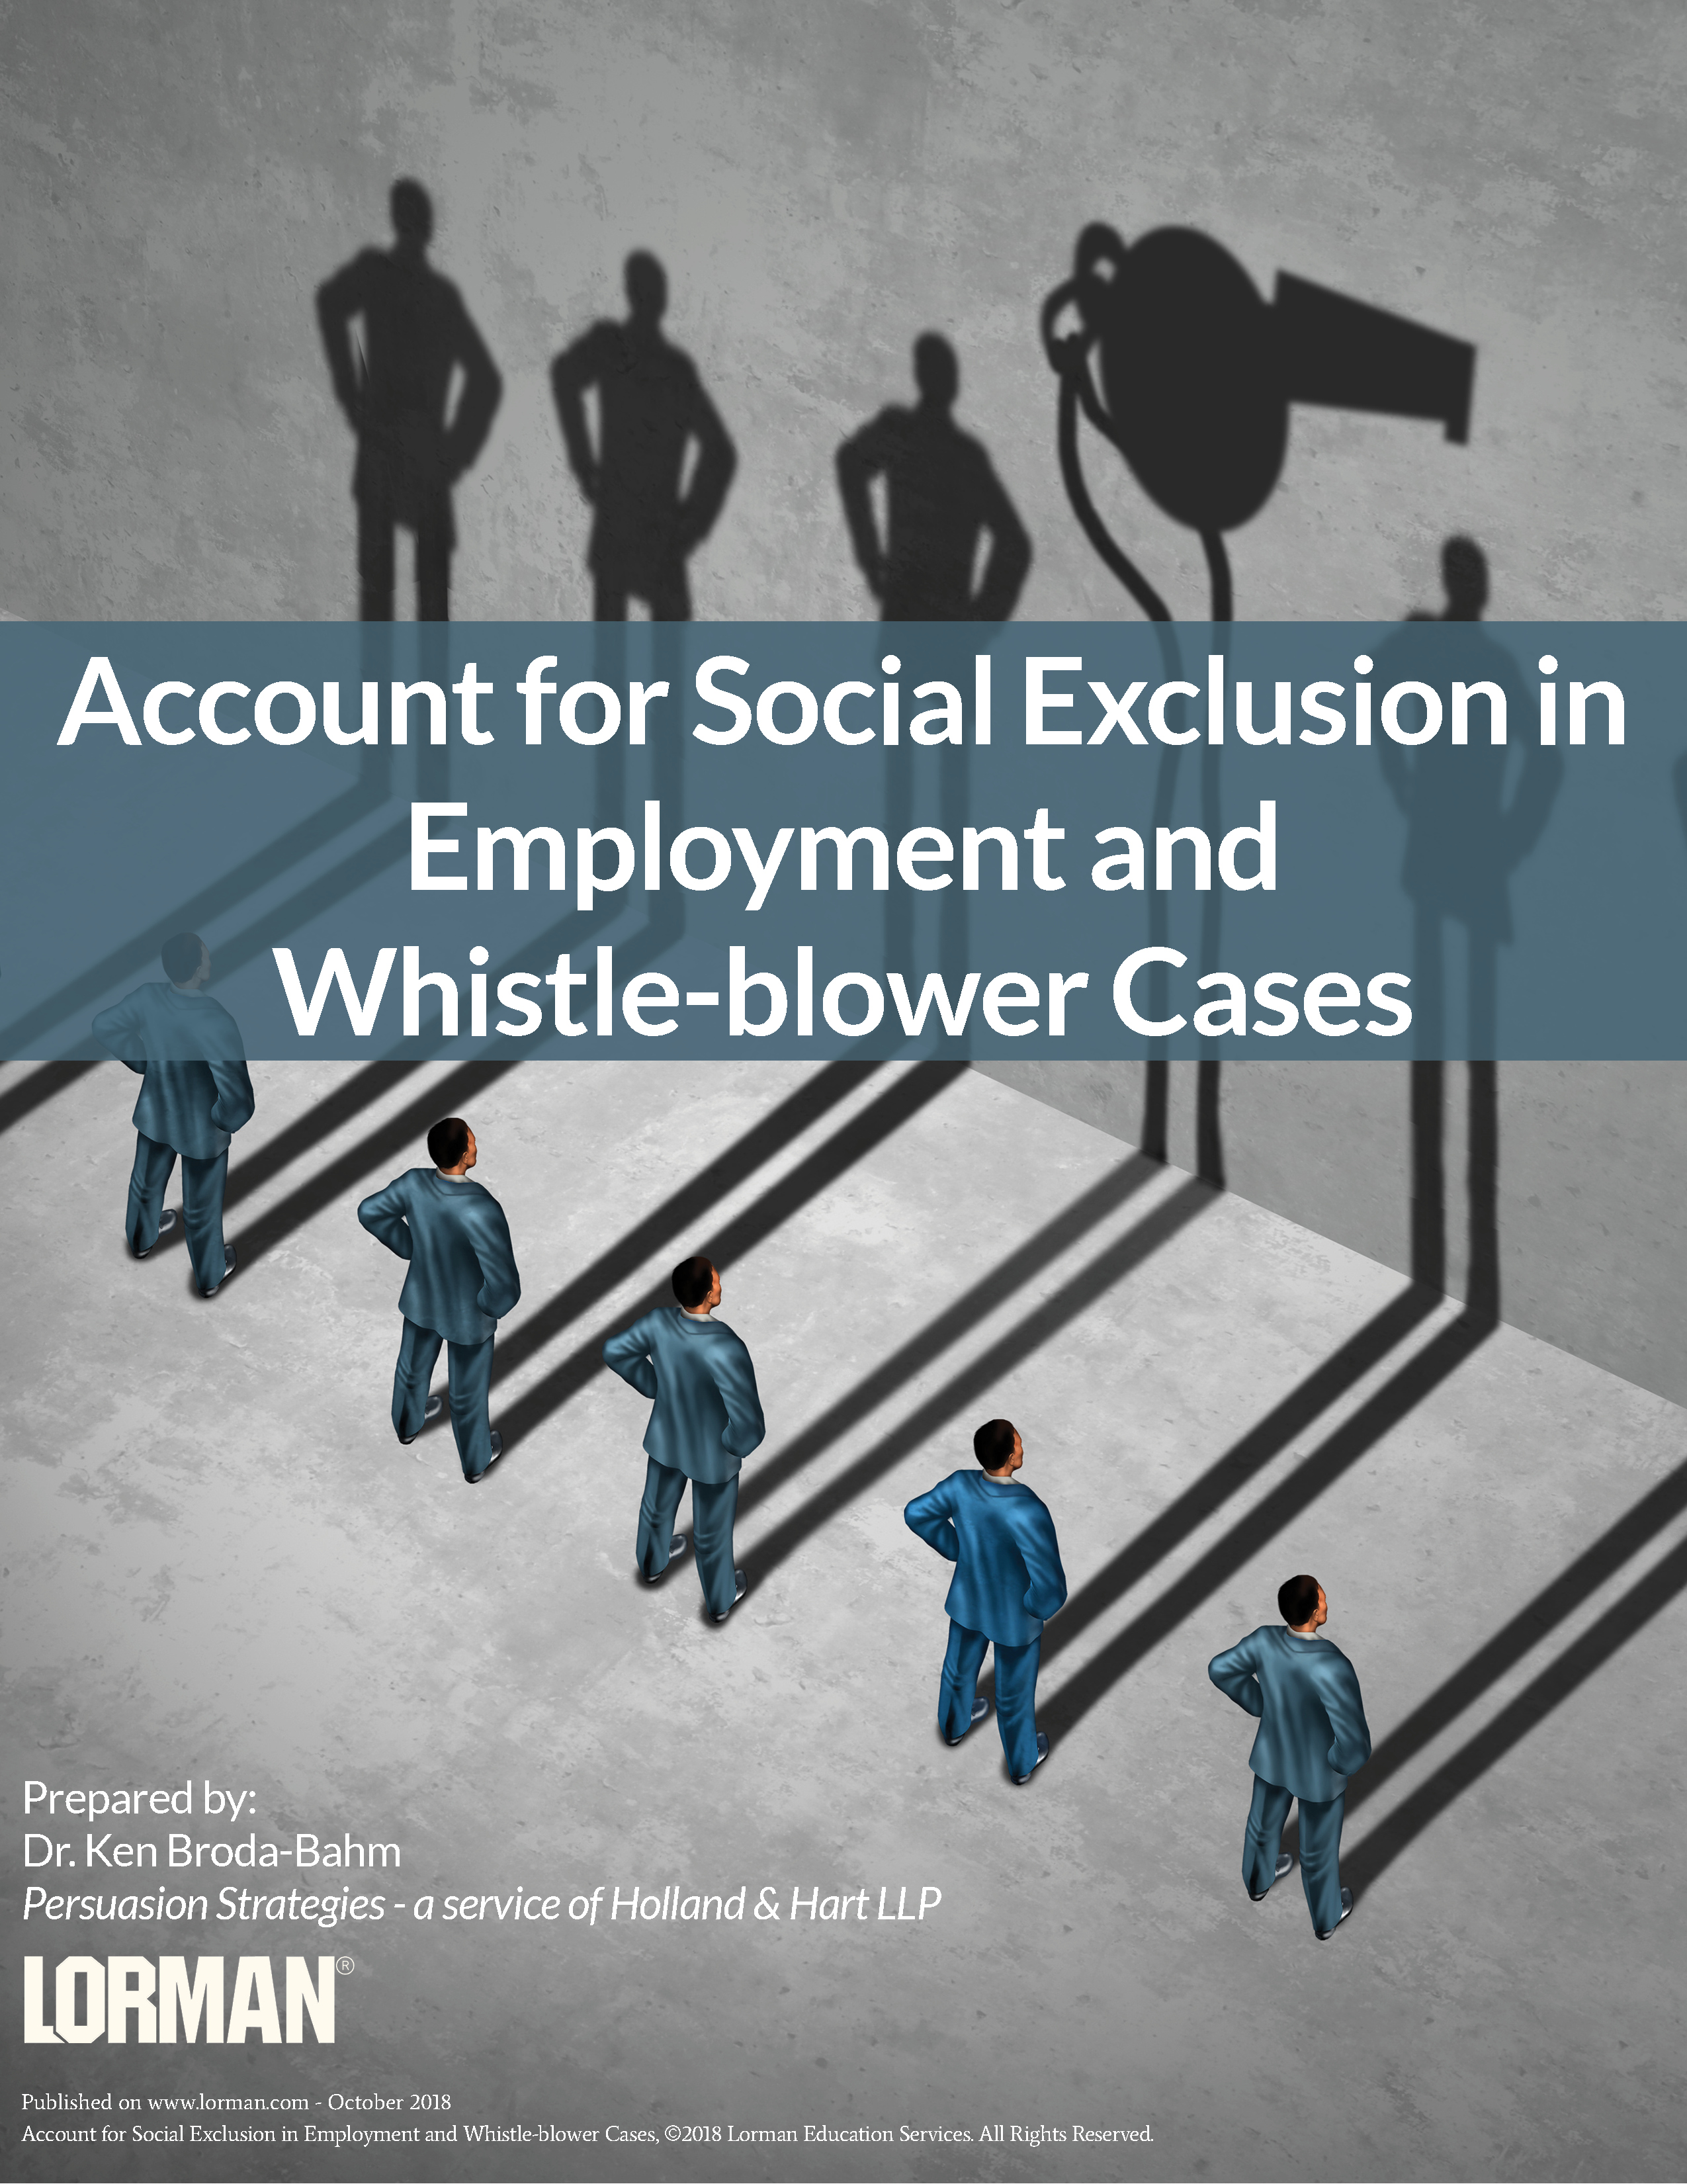 Account for Social Exclusion in Employment and Whistle-blower Cases